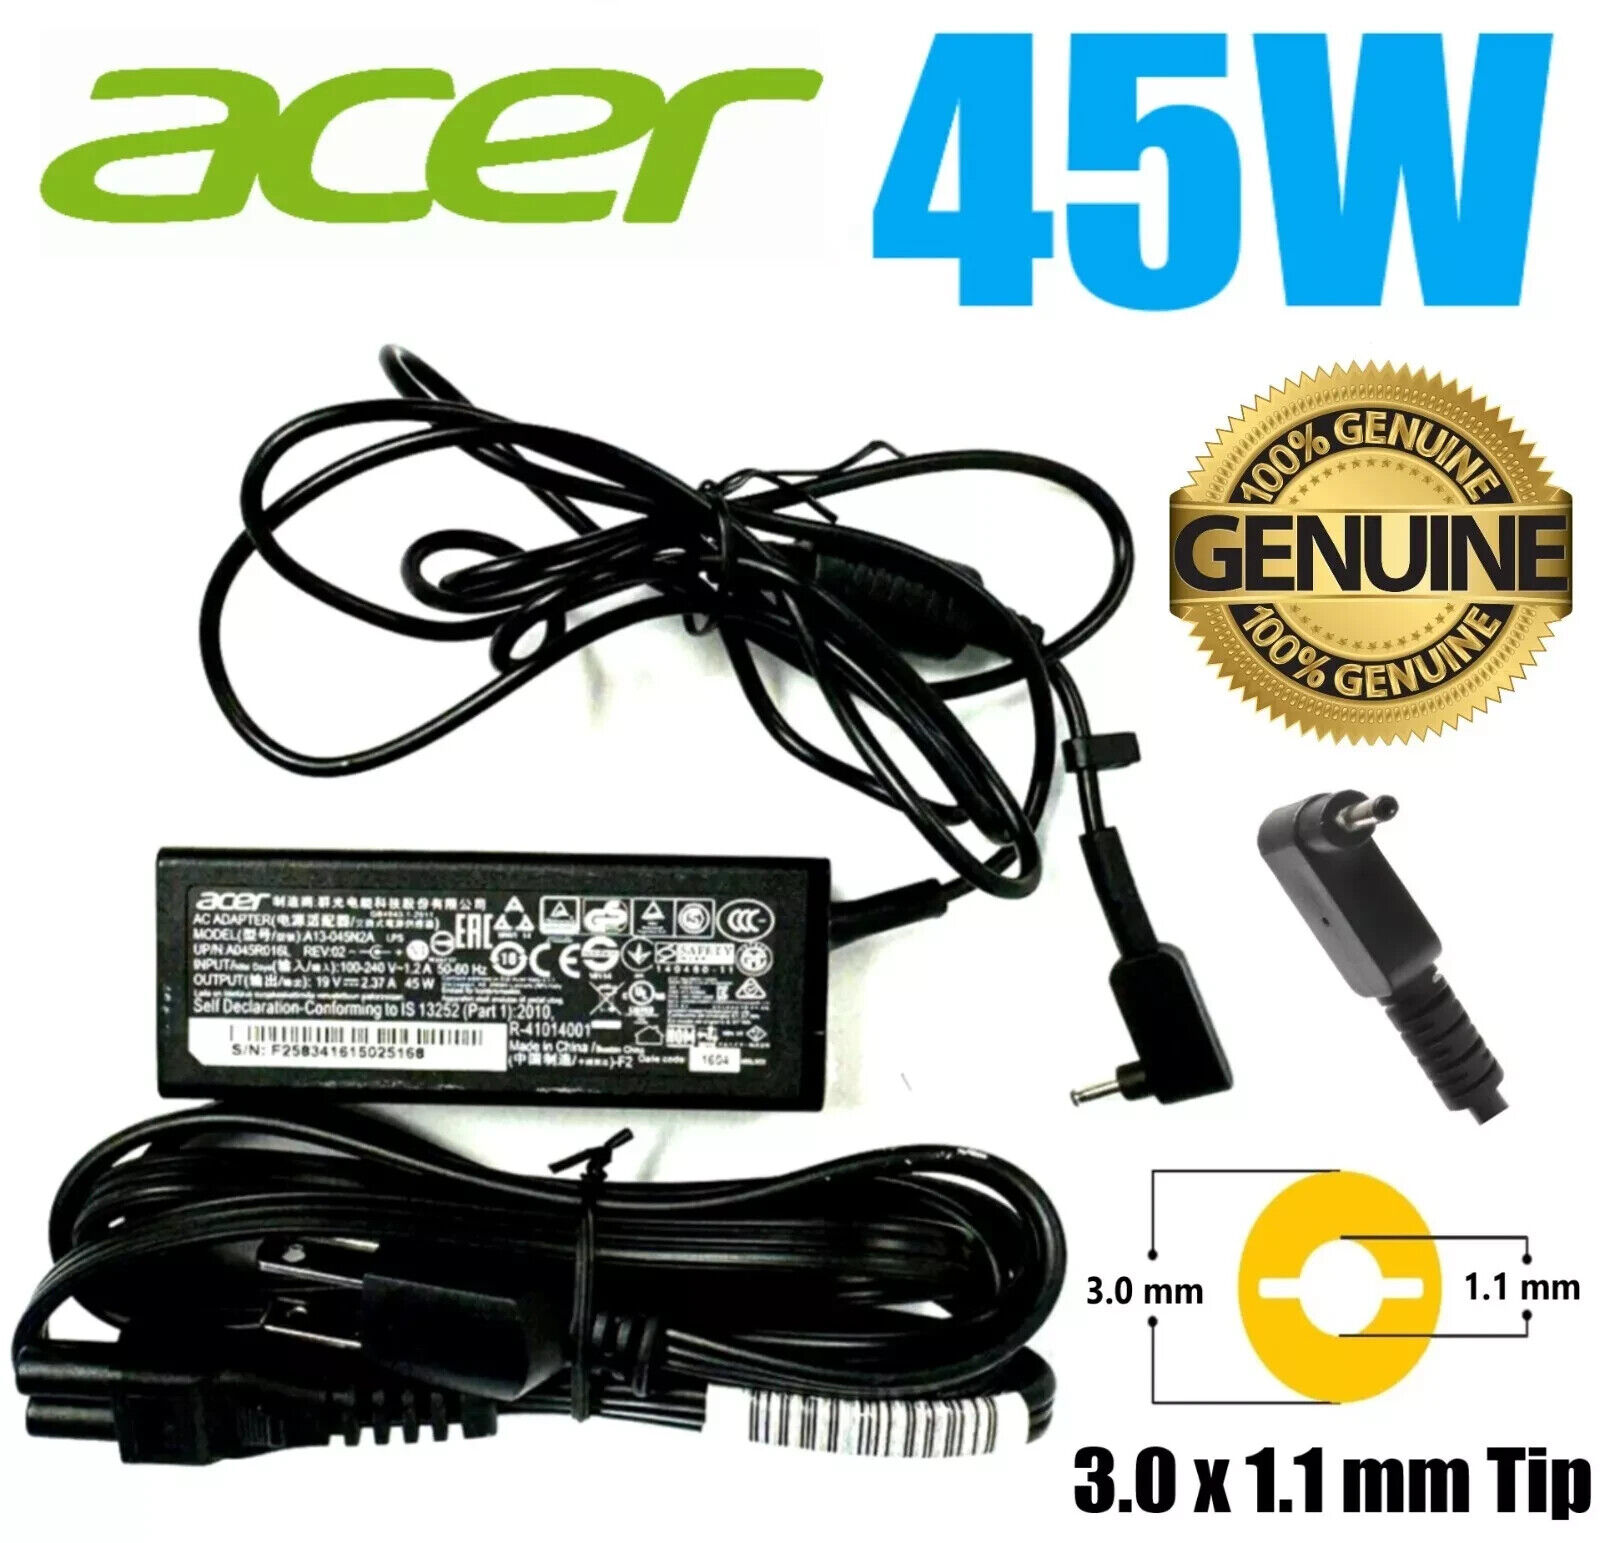 Lot of 20 Acer OEM 45W Adapter for Acer Chromebook11 A13-045N2A C720 PA-1450-26